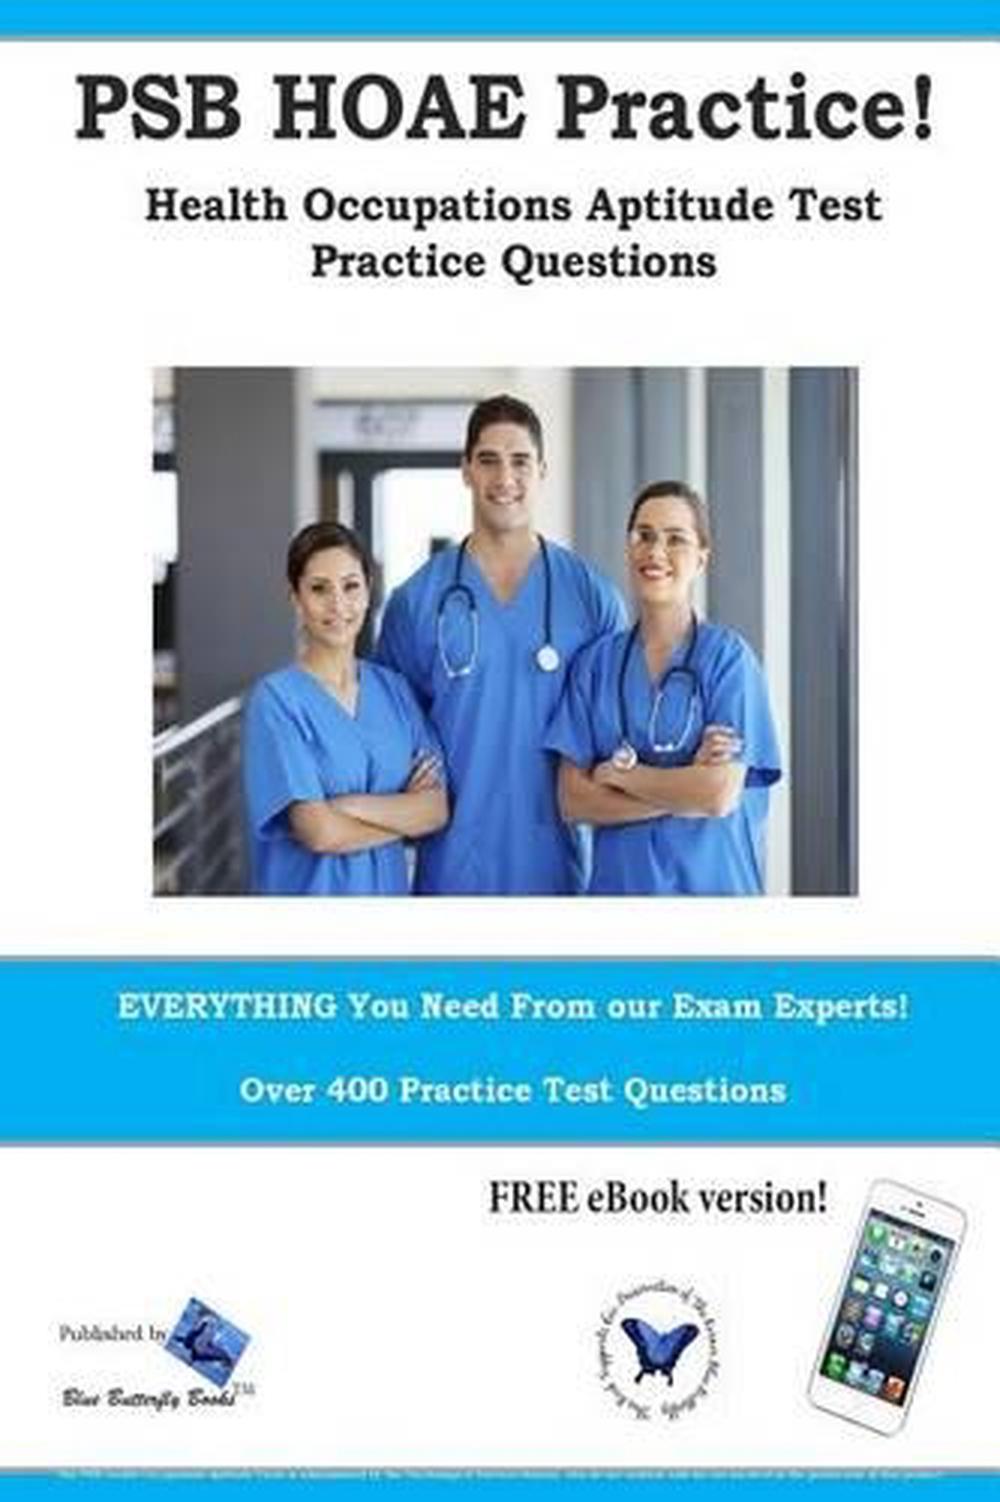 psb-hoae-practice-health-occupations-aptitude-test-practice-questions-by-blue-b-9781987862010